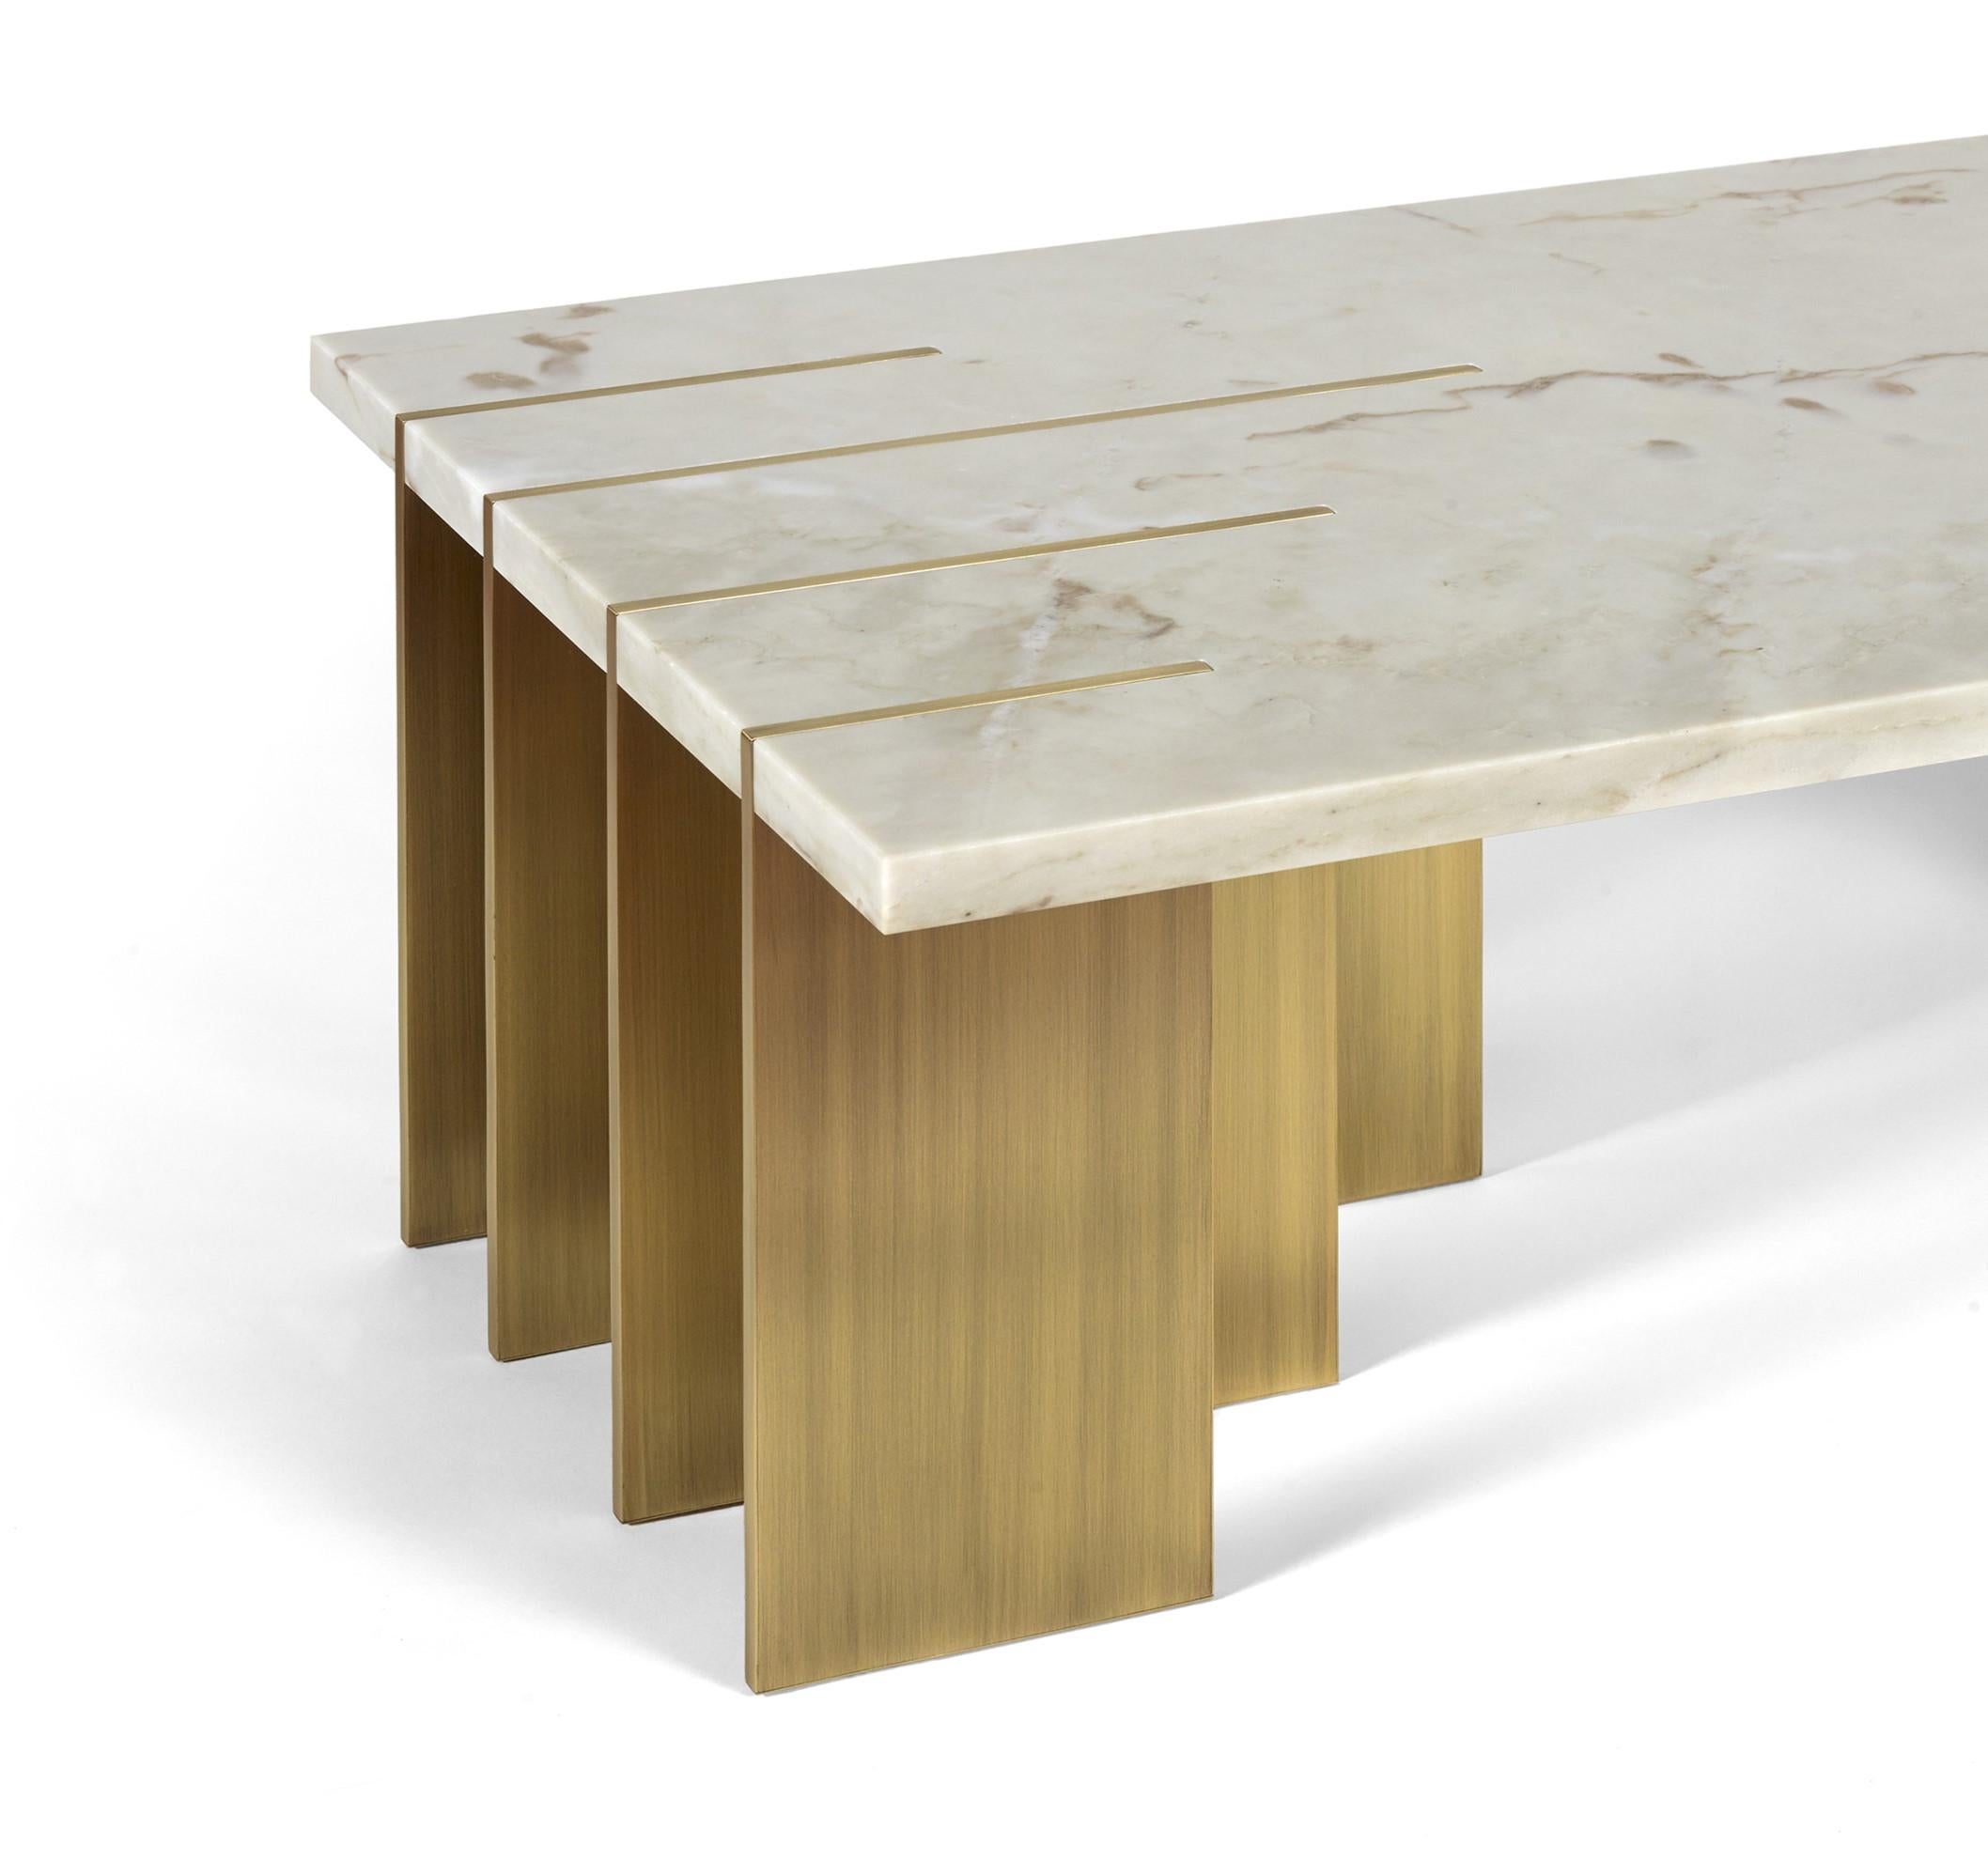 Portuguese Pianist Estremoz Marble Coffee Table by InsidherLand For Sale